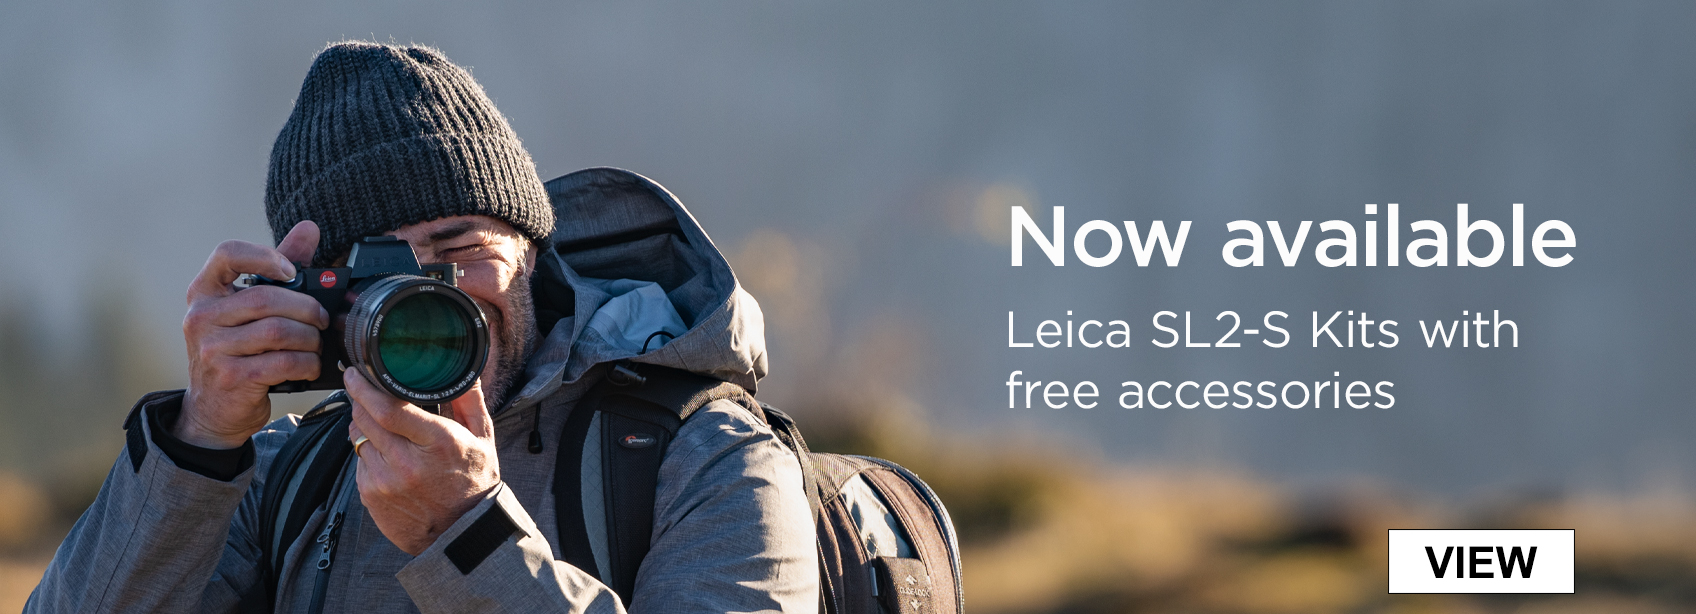 Now available Leica SL2-S Kits with free accessories